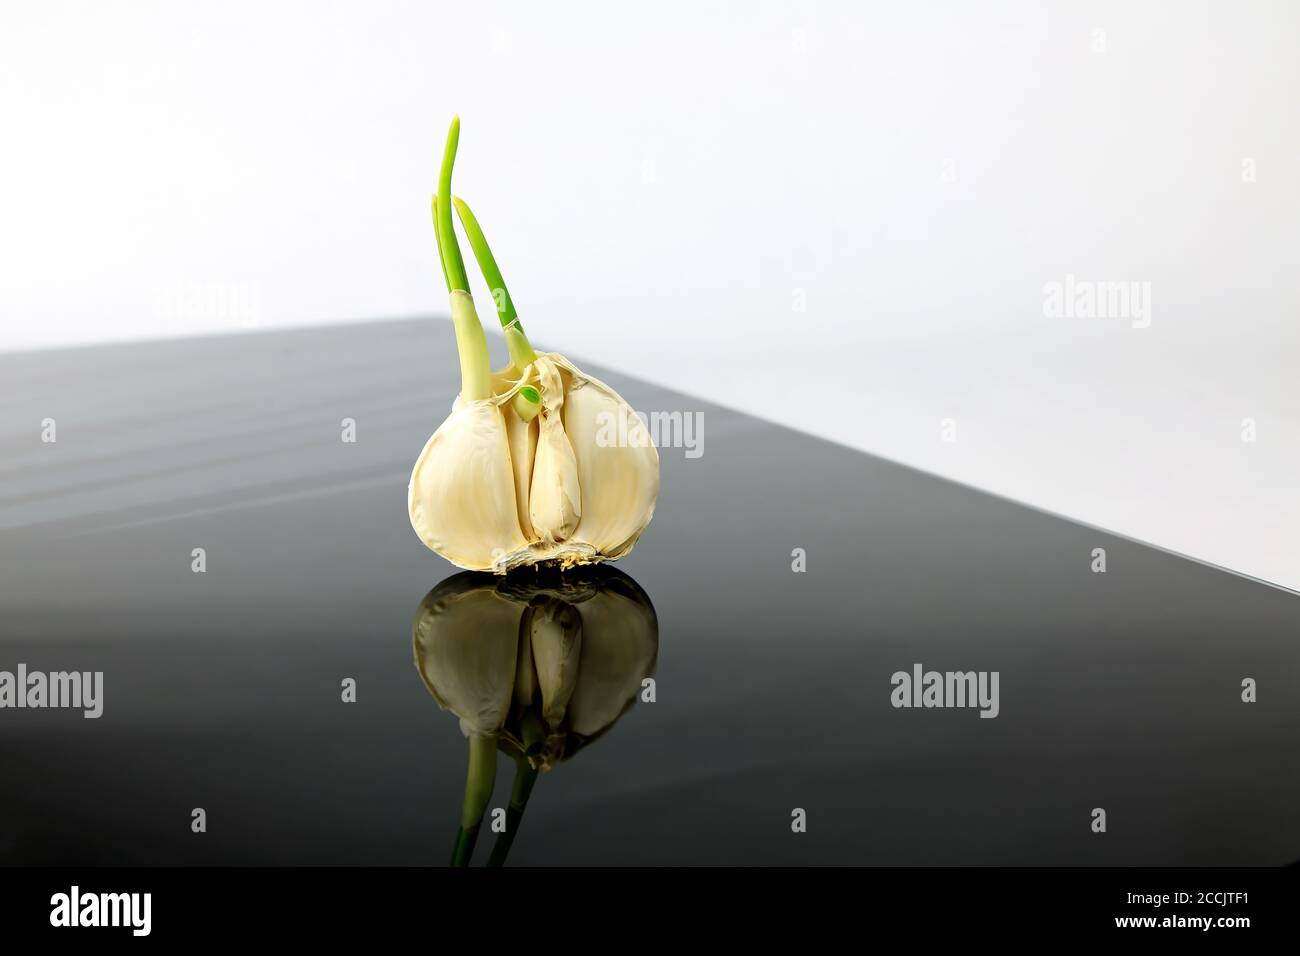 Garlic on a black plate wanders across the picture Stock Photo